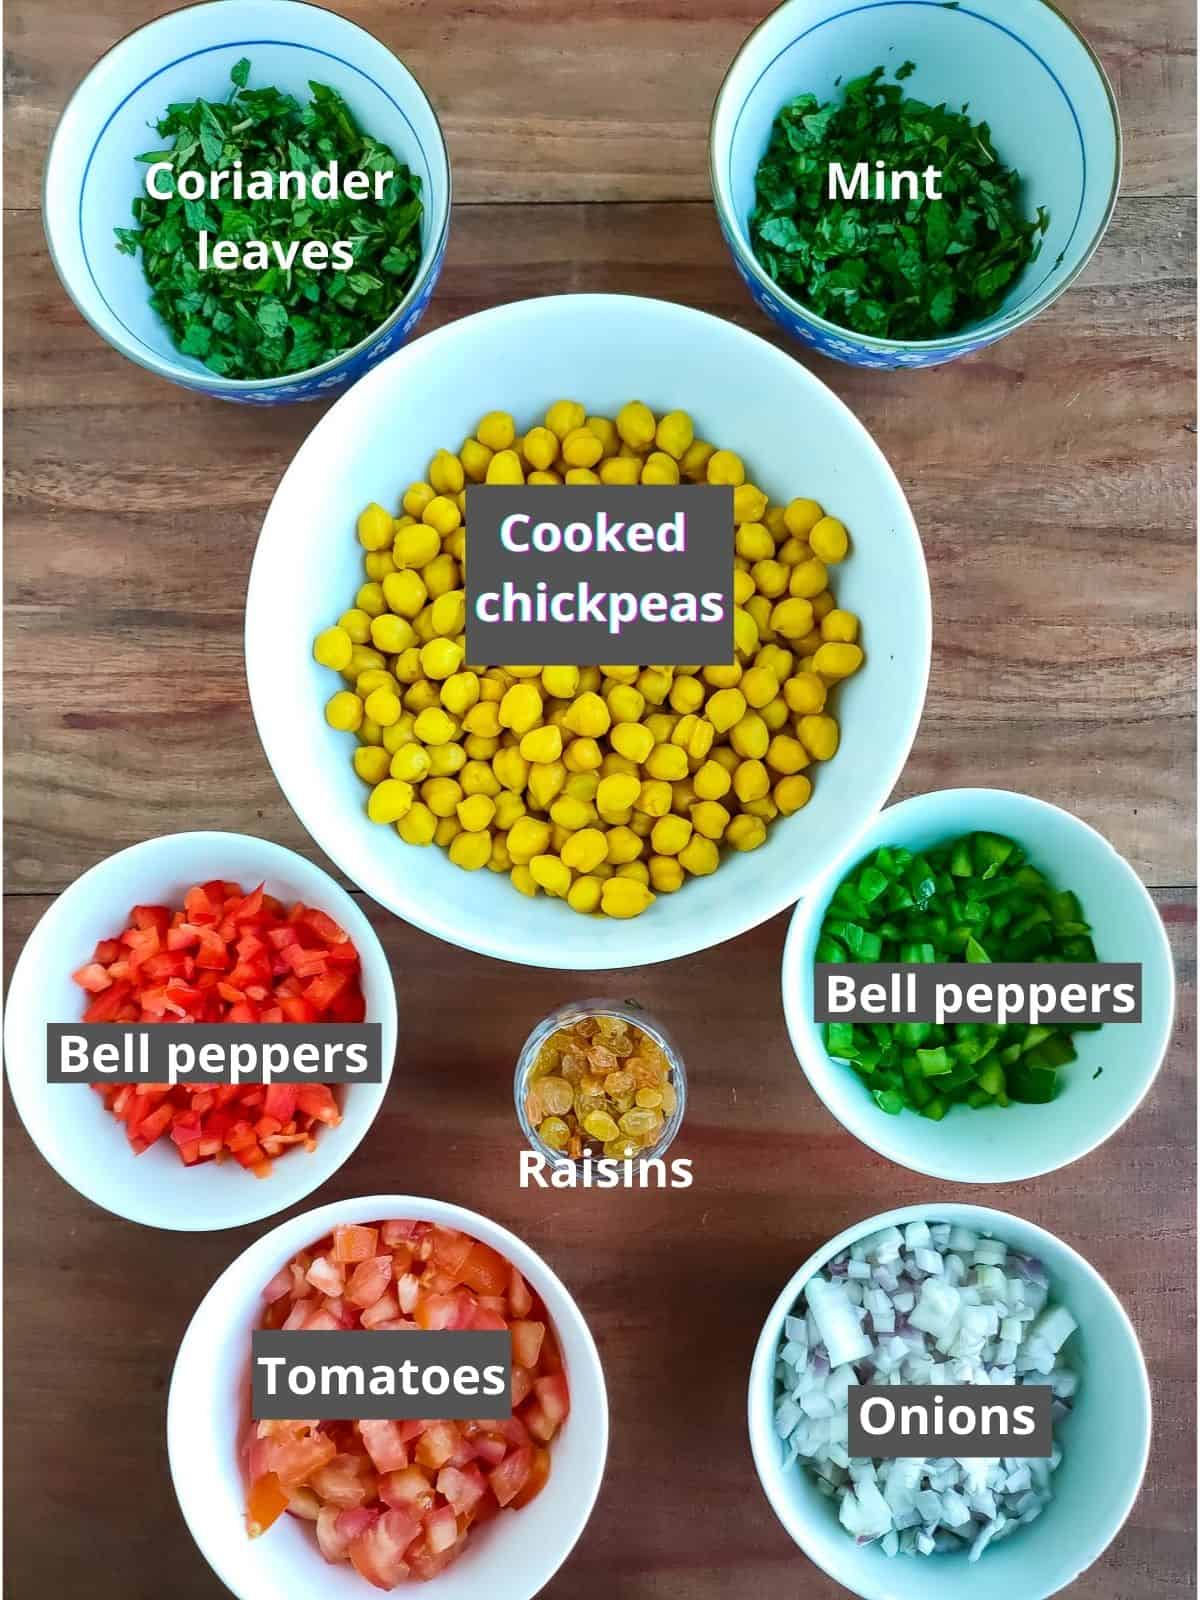 Labelled ingredients for Indian chickpea salad recipe.